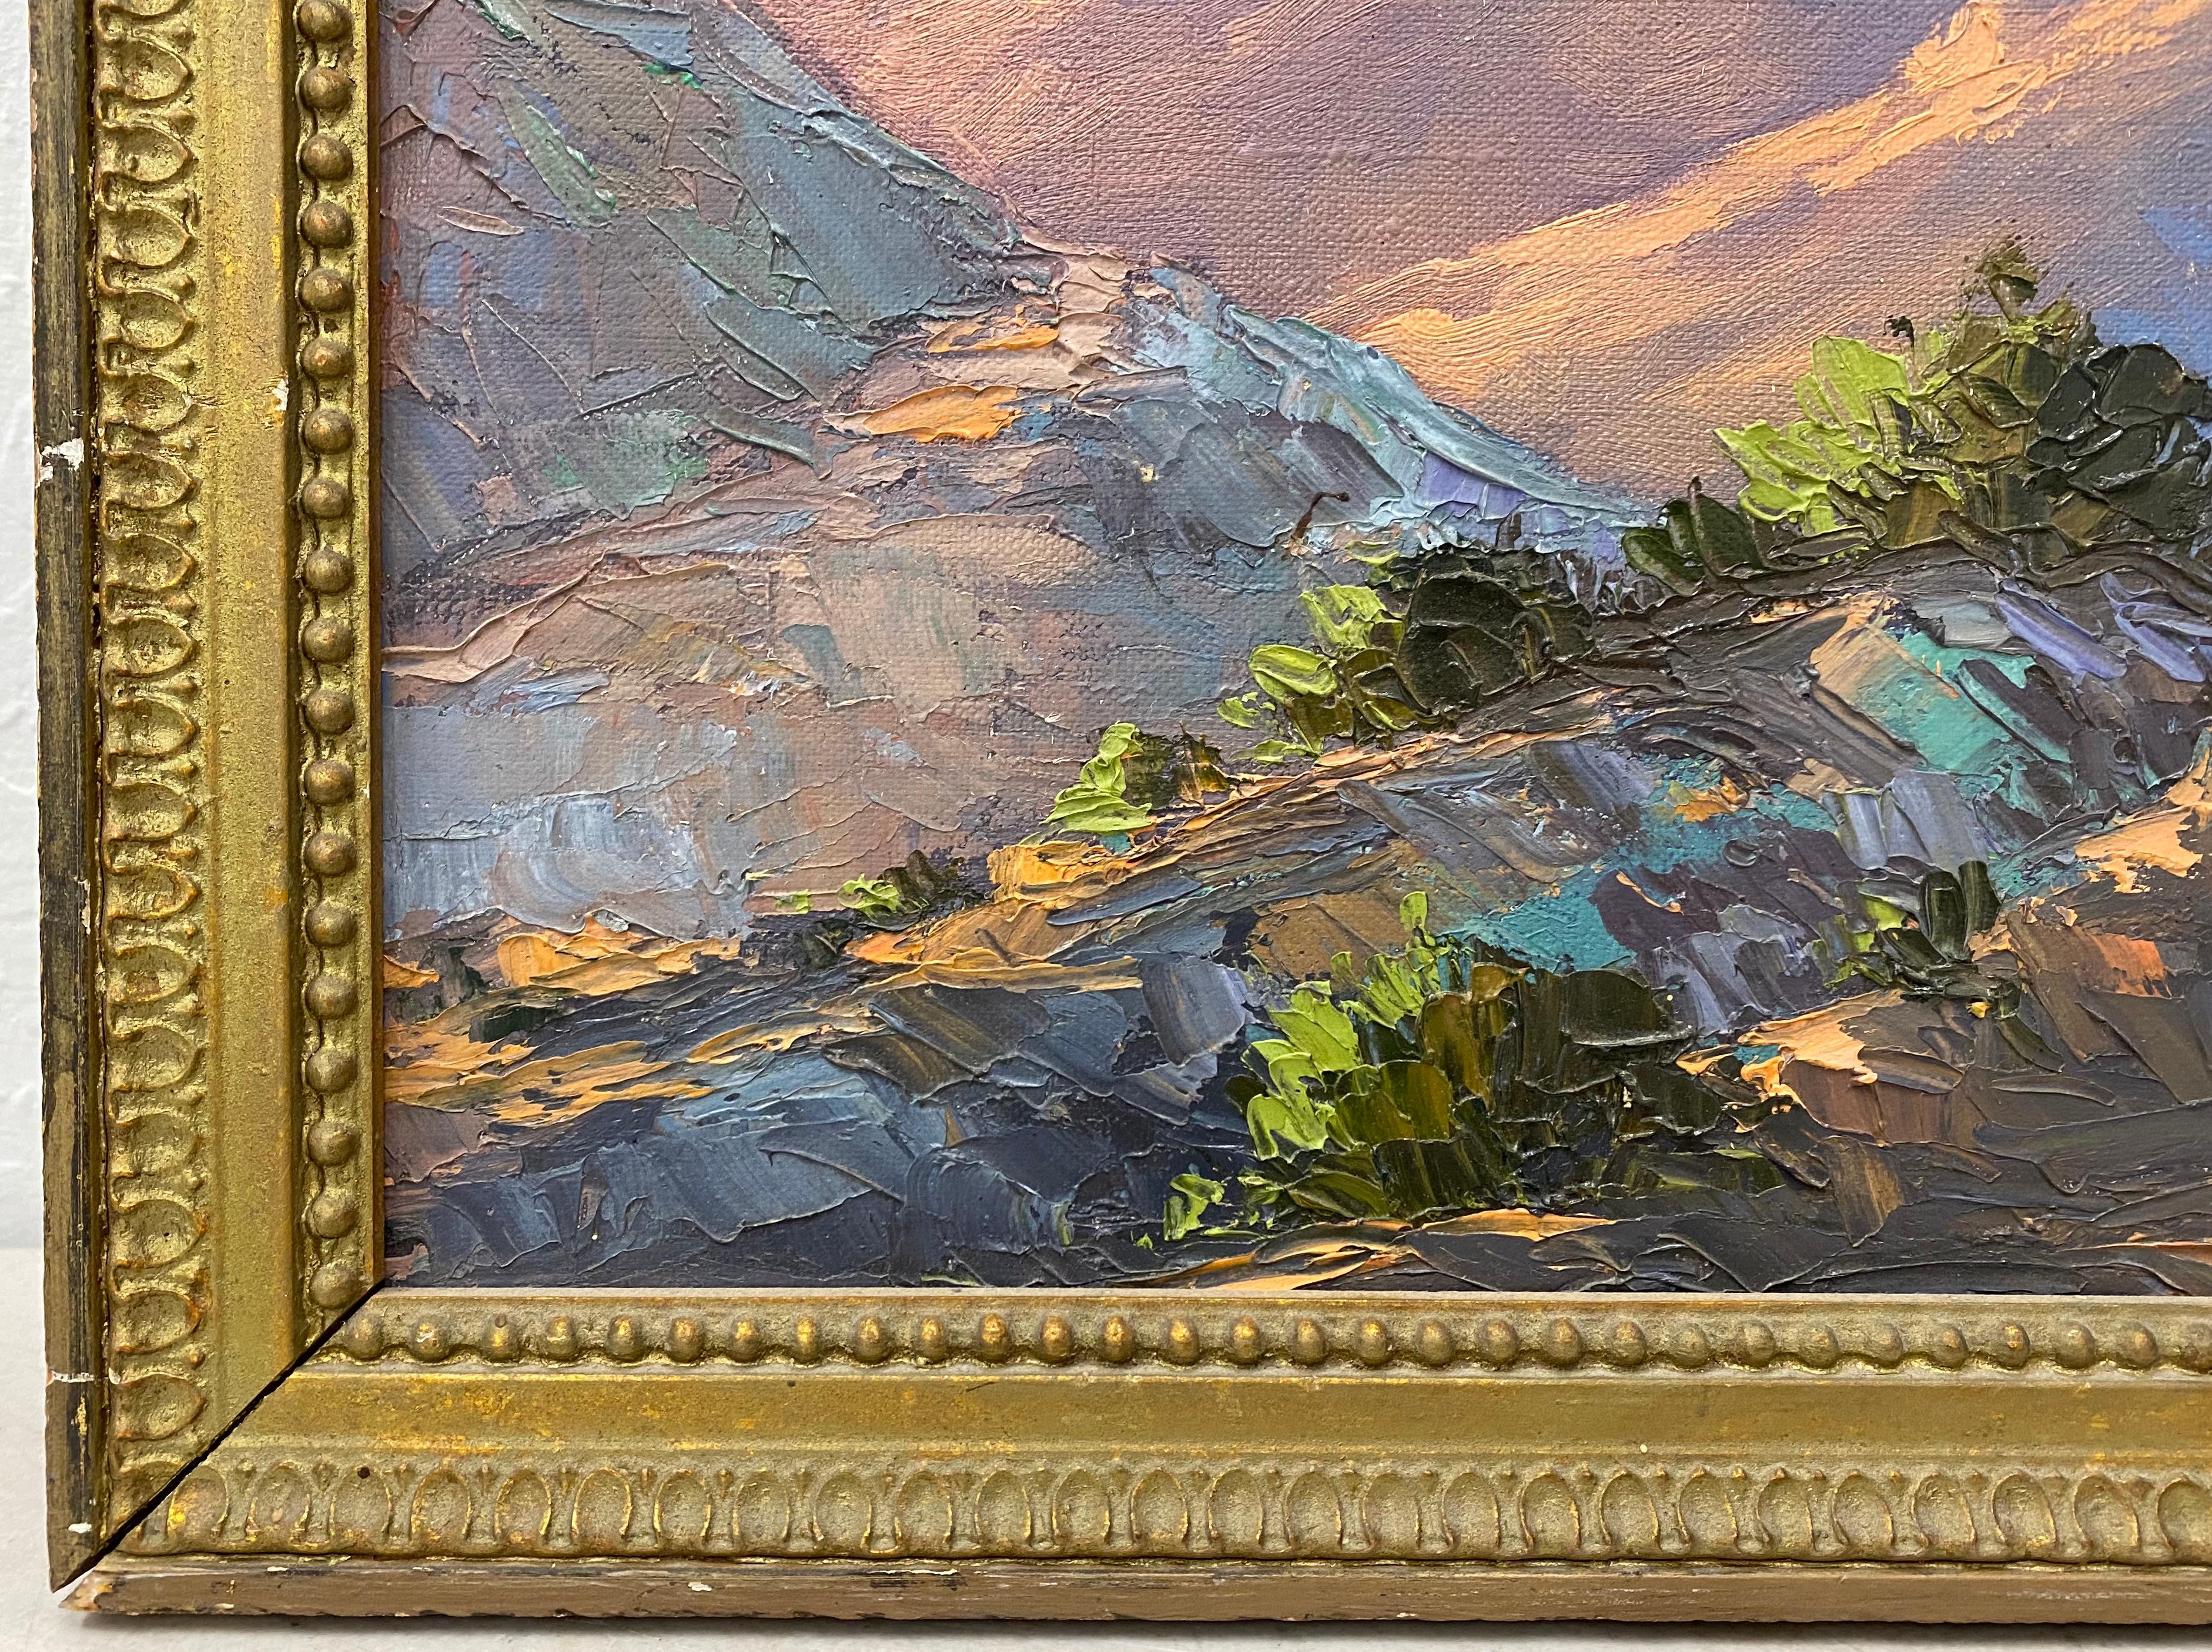 Majestic Mountain Landscape Original Oil Painting C.1940

Beautiful luminous mountain landscape oil painting

Original oil on canvas - No visible signature

Includes the original period frame (distressed - as is)

The painting is in very good